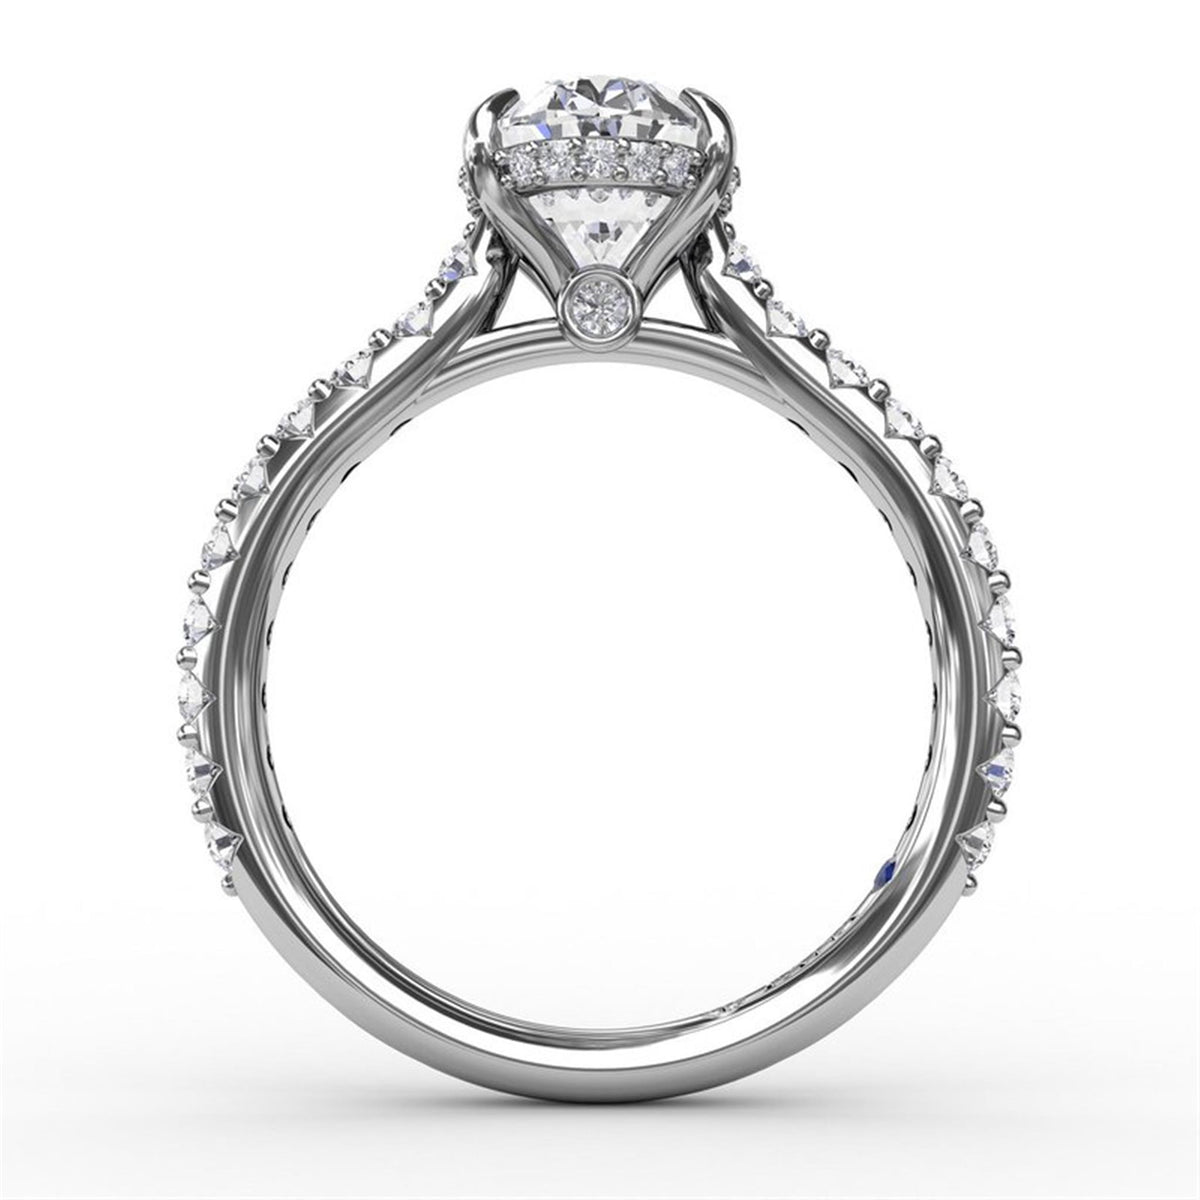 14Kt White Gold Engagement Ring Mounting With 0.48cttw Natural Diamonds